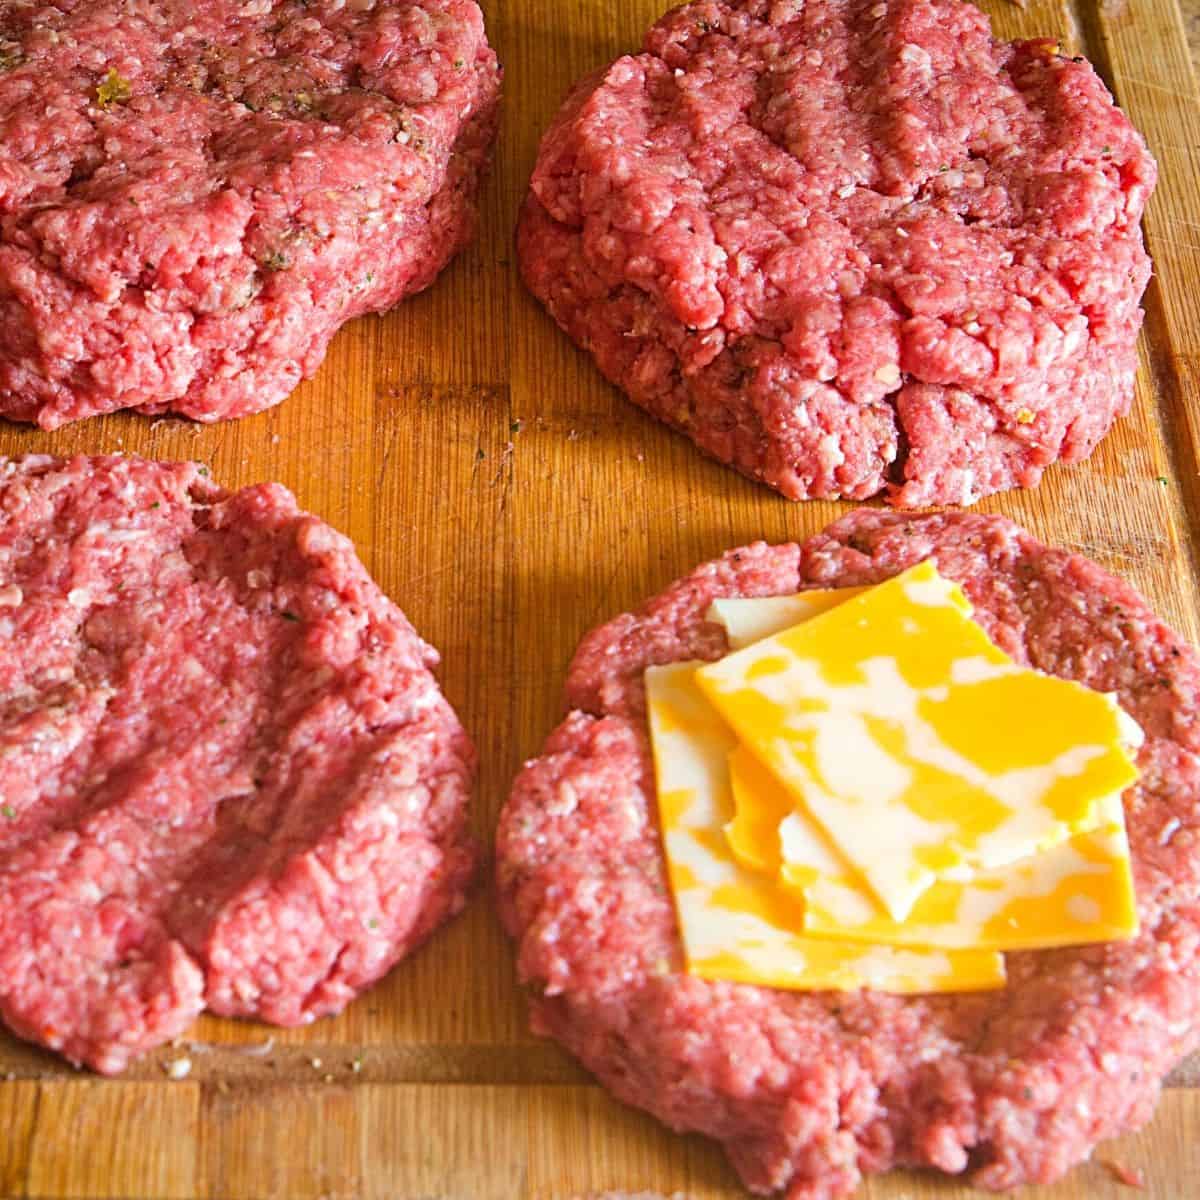 Four beef patties that have colby jack cheese in the center for juicy lucy burgers.